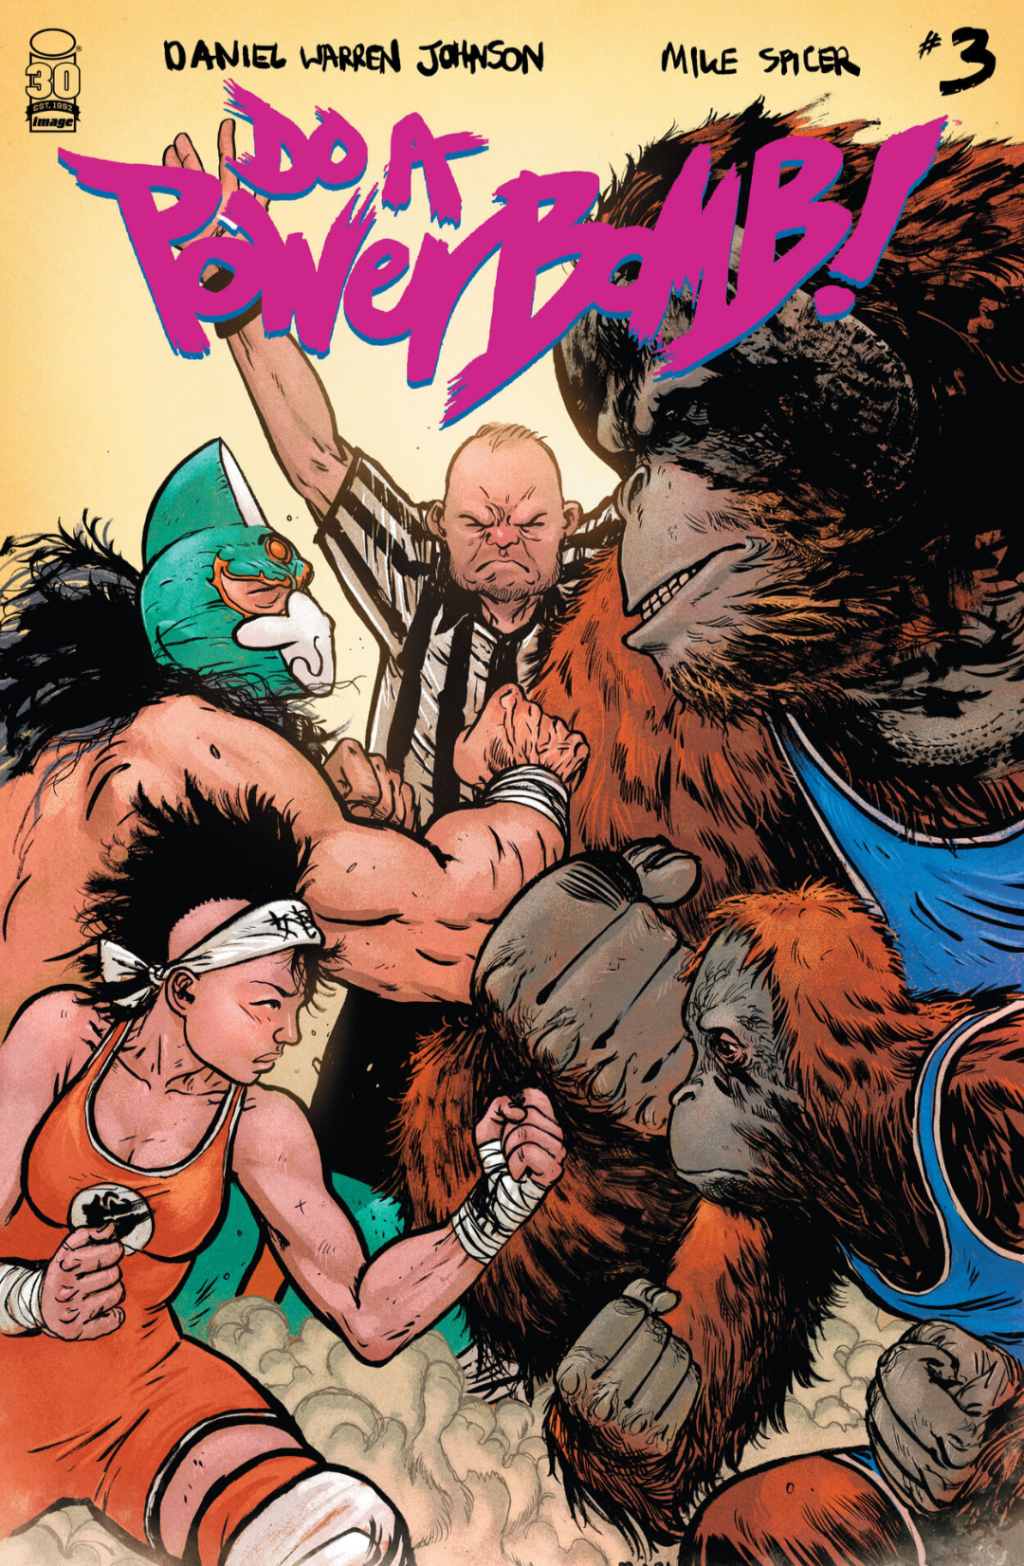 Comic Book Review: Do A Powerbomb #3